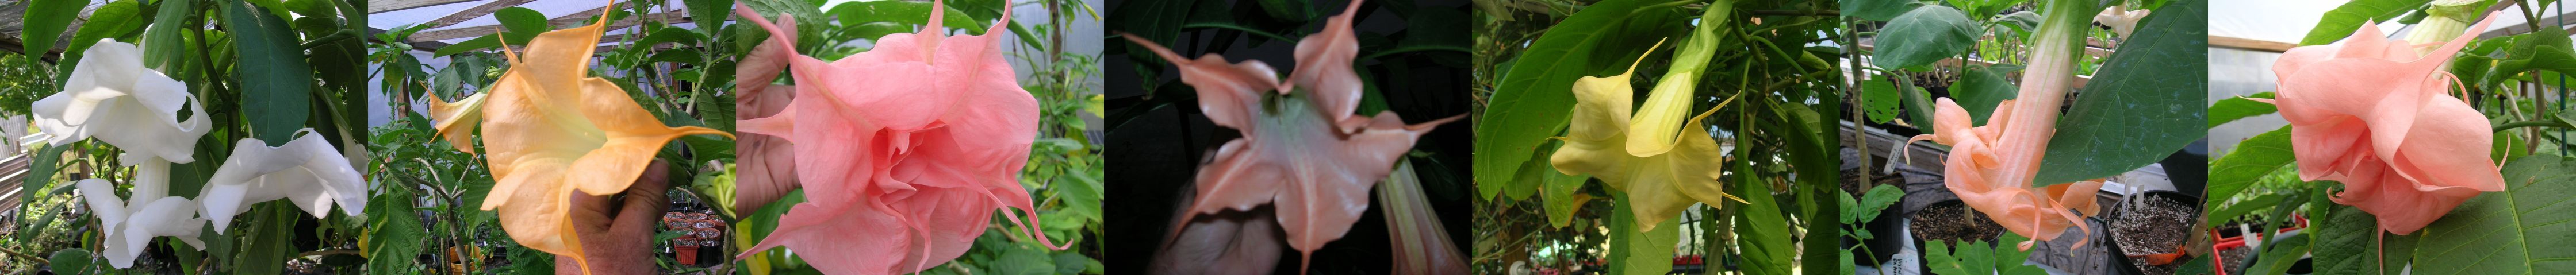 country garden brugmansia picture